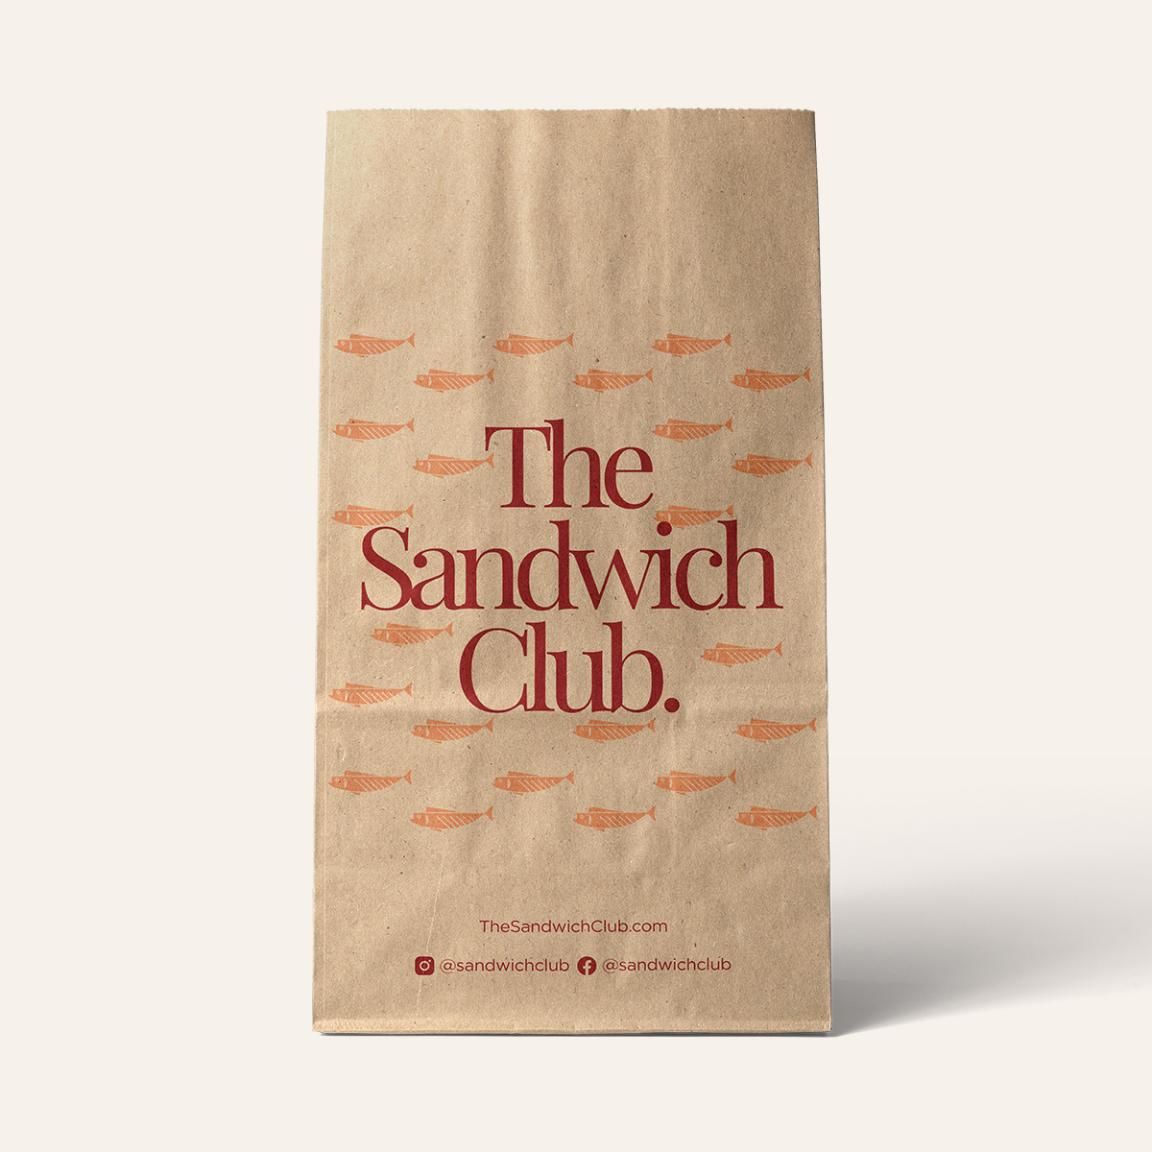 Here’s Why Your Bakery or Food Delivery Business Should Use Eco-Friendly Sandwich Bags